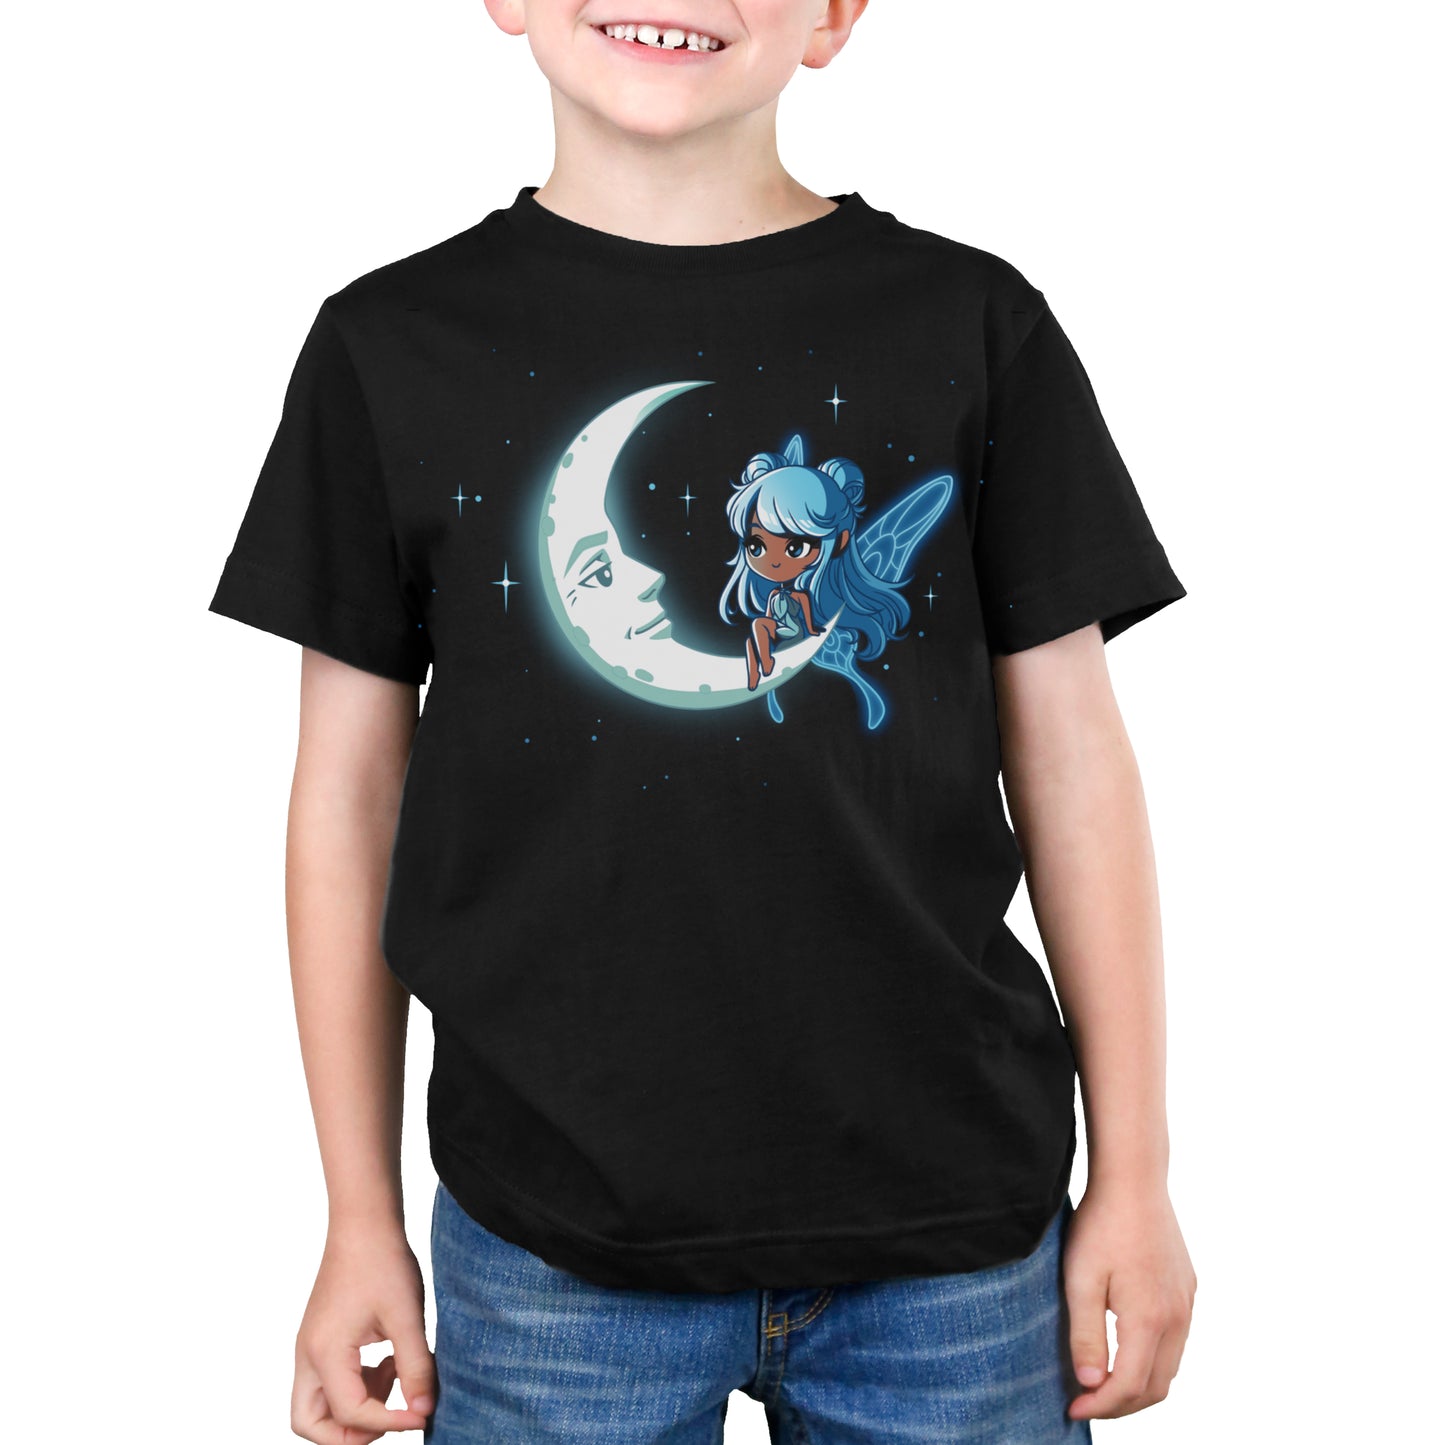 Premium Cotton T-shirt - A child wears a super soft ringspun cotton black apparel featuring the design "Celestial Fairy" by monsterdigital, showcasing a moon with a face and a celestial fairy with blue hair and wings, surrounded by stars.